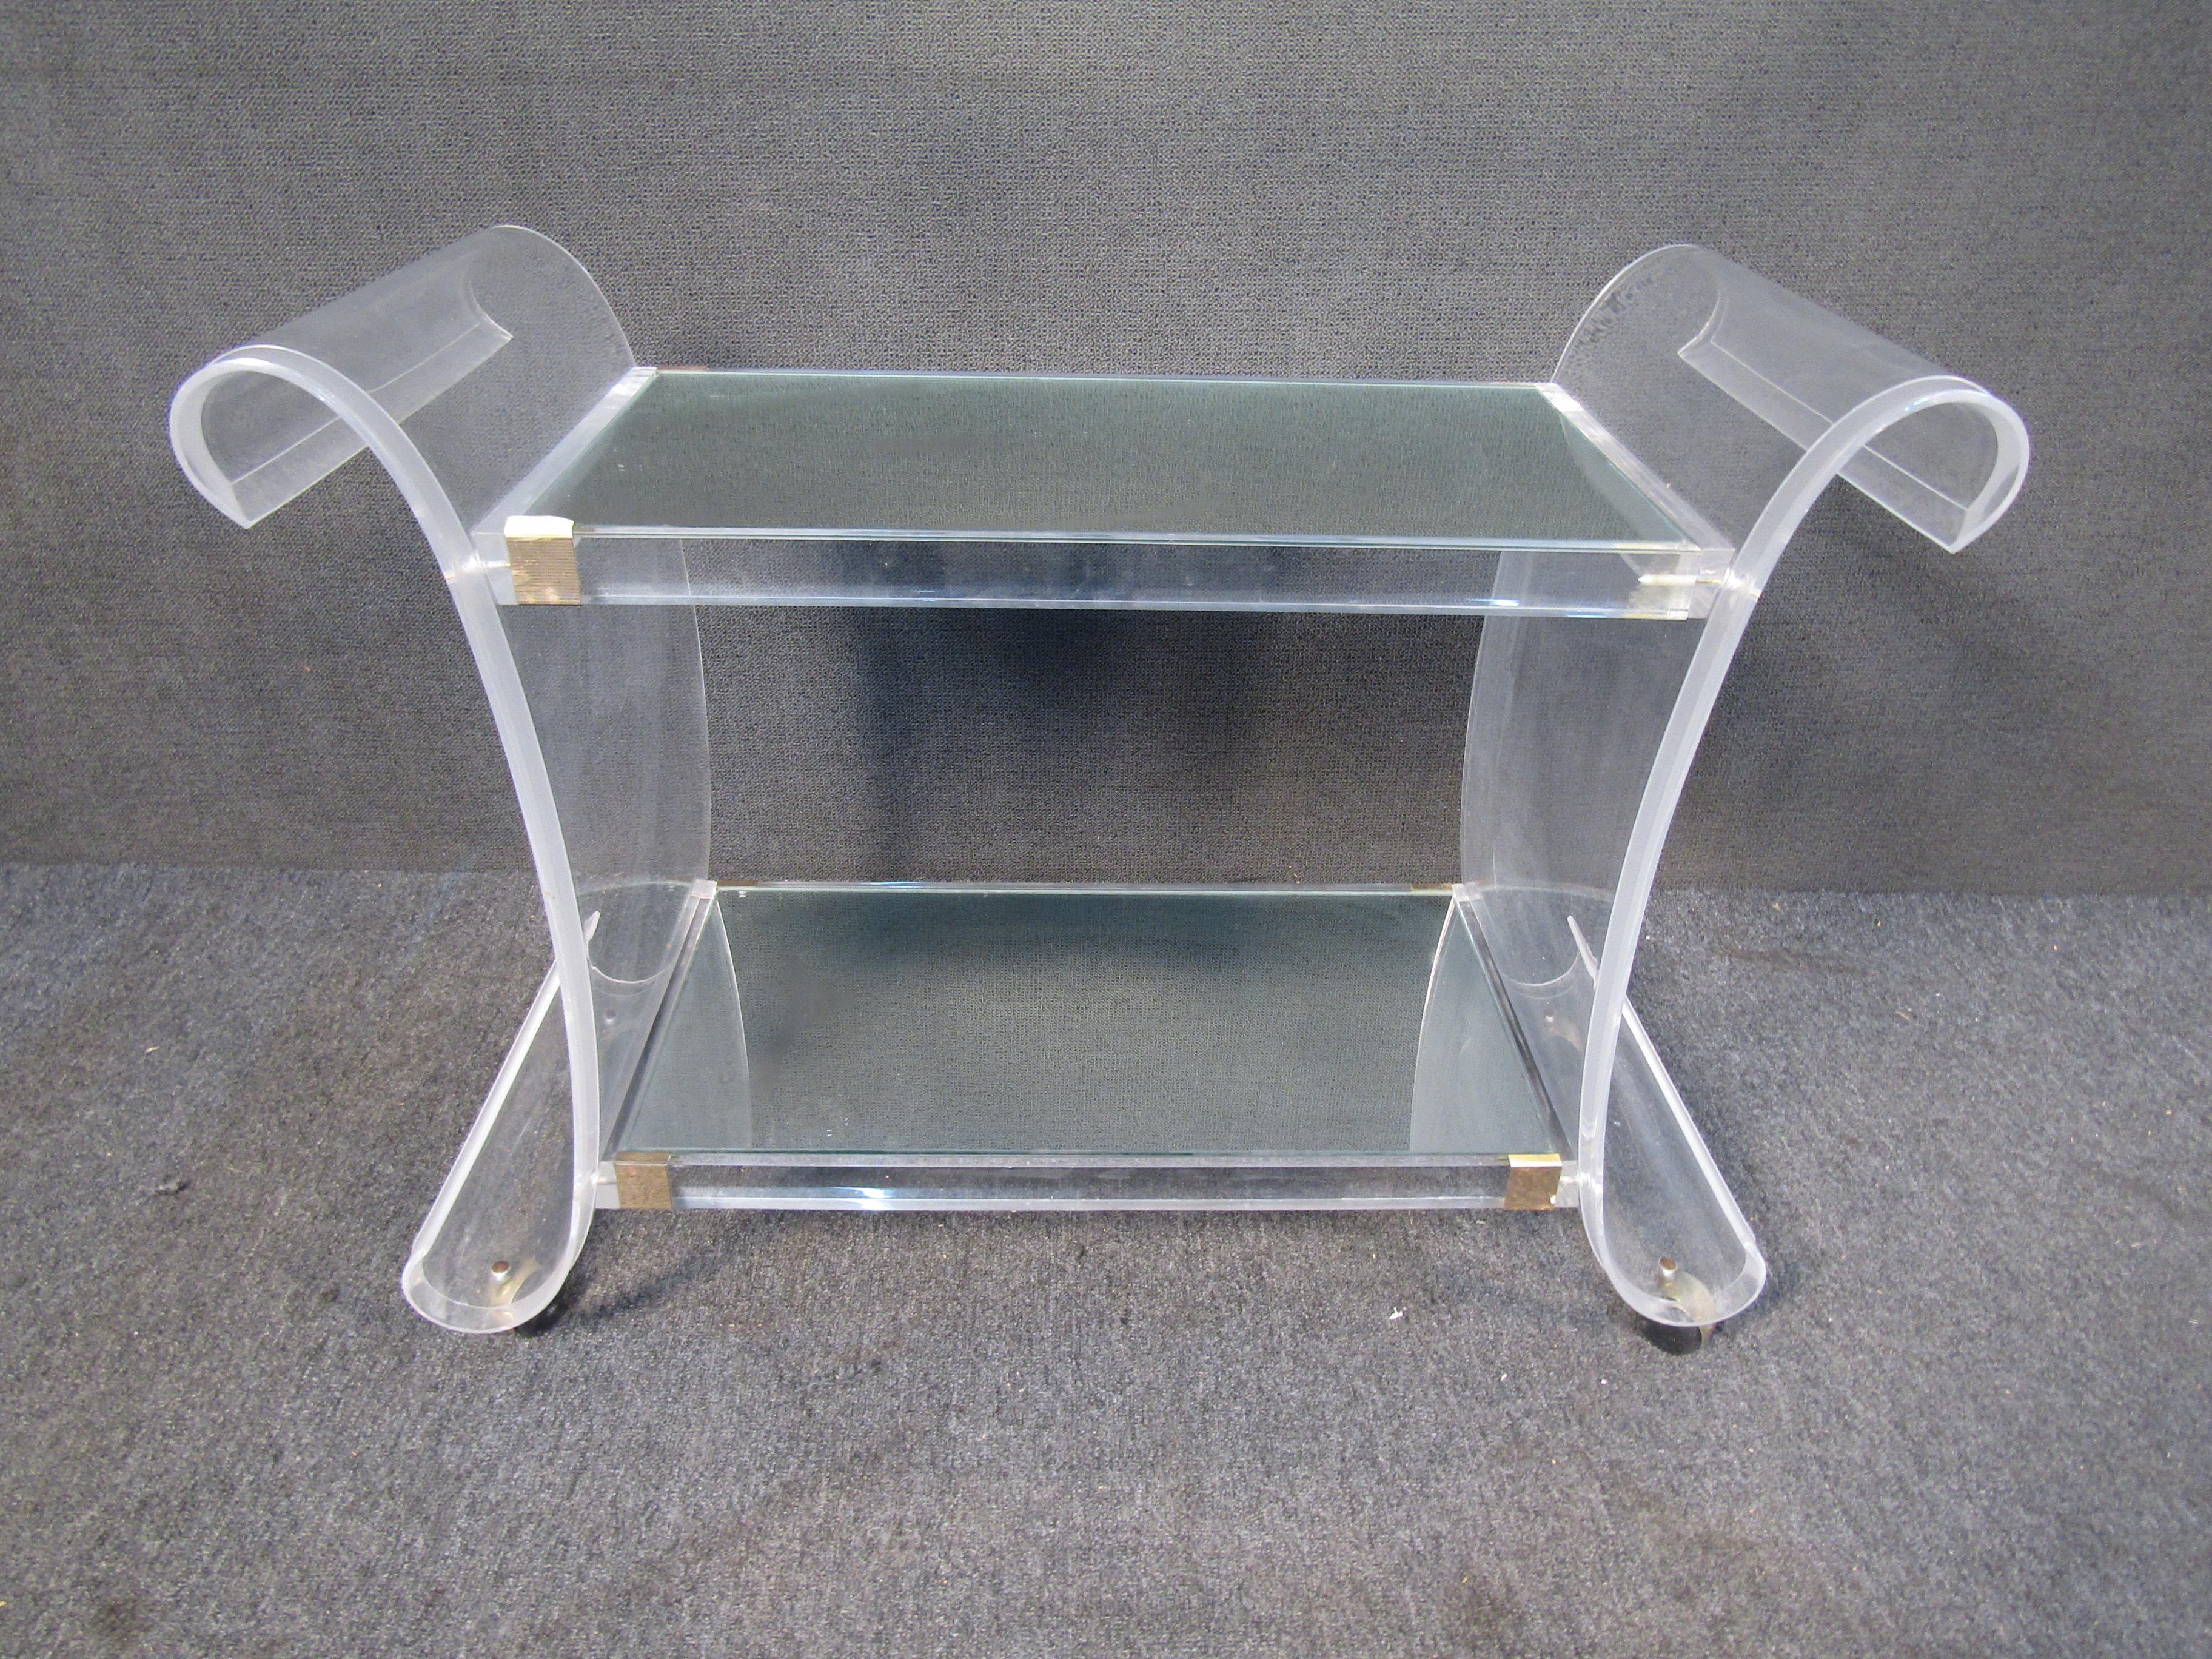 With a very unique curving lucite frame, metal accents, and a mirrored top, this two-tiered bar cart is an eye-catching addition to any kitchen or interior. Please confirm item location with seller (NY/NJ).